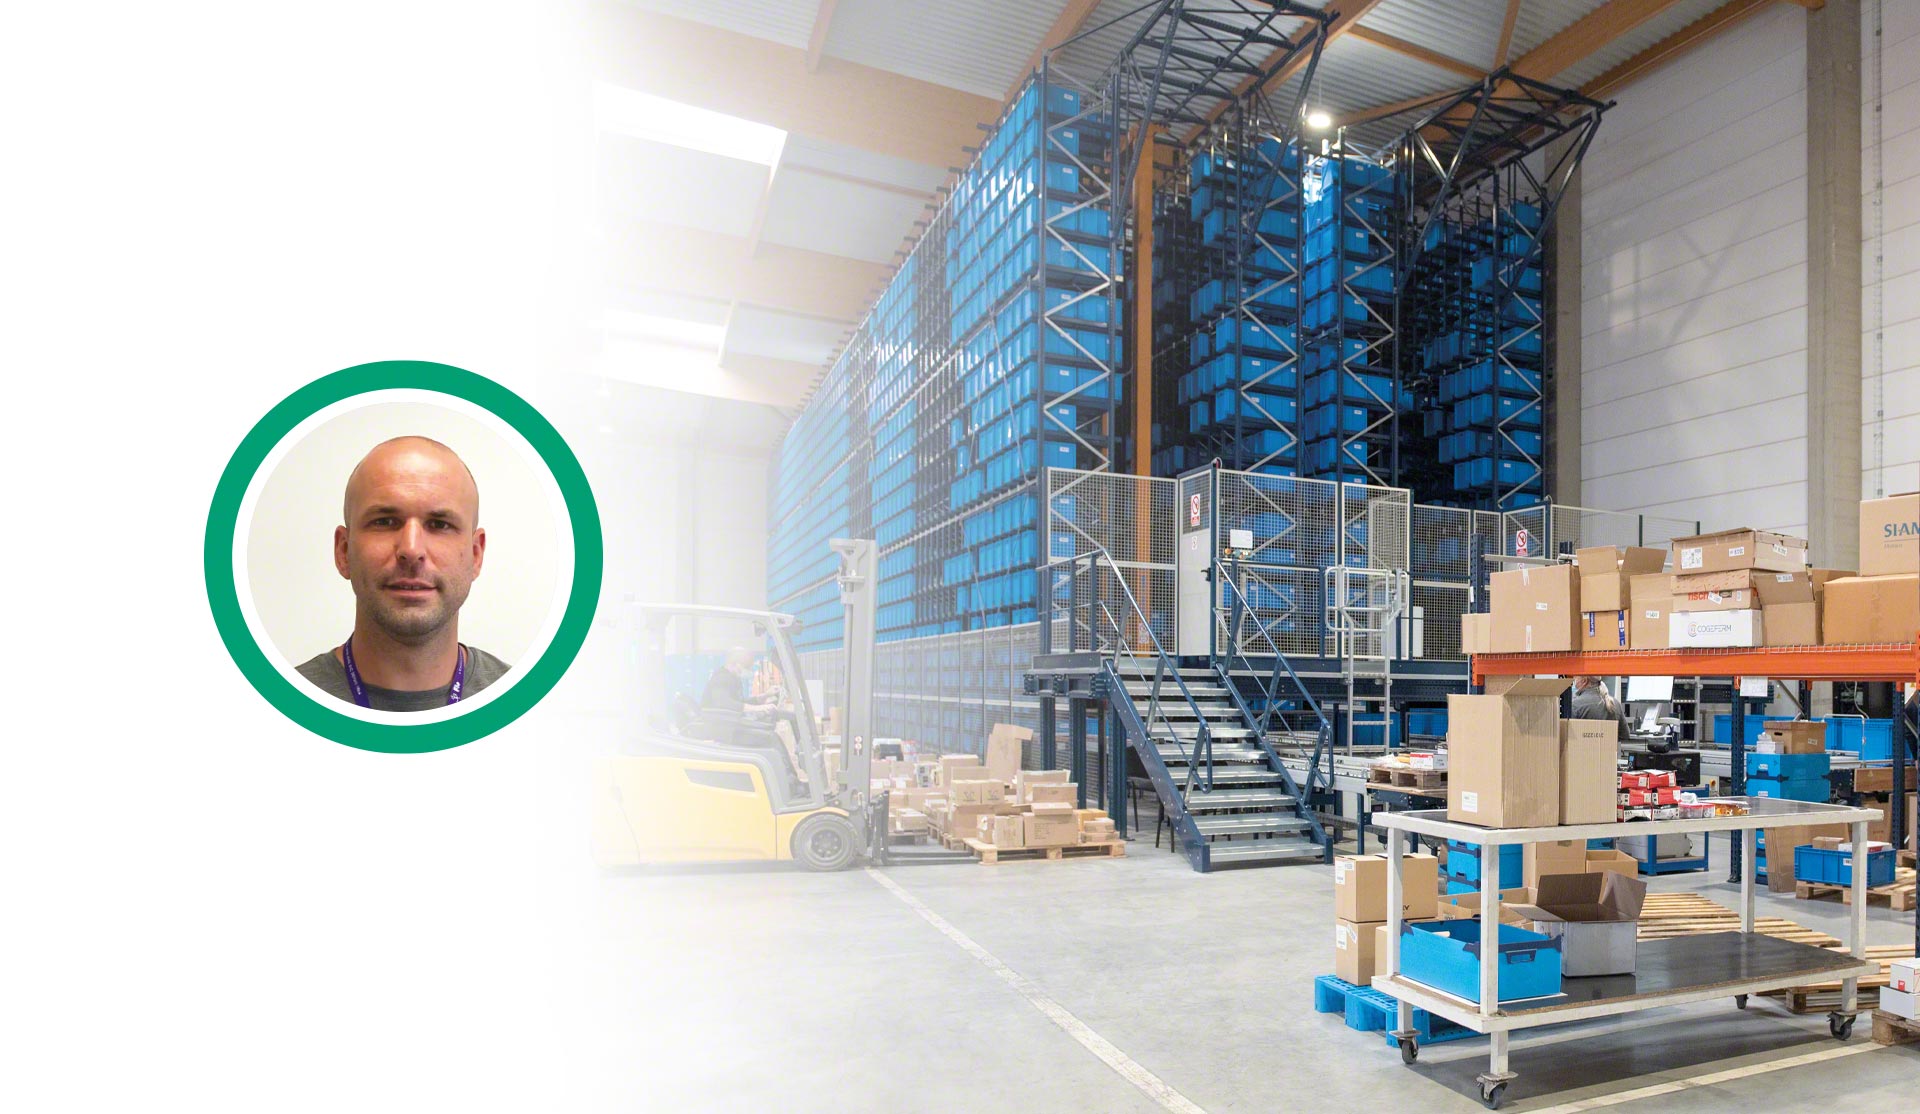 Interview with Yannick Taton, Head of Procurement, Logistics, and Transportation at FIC